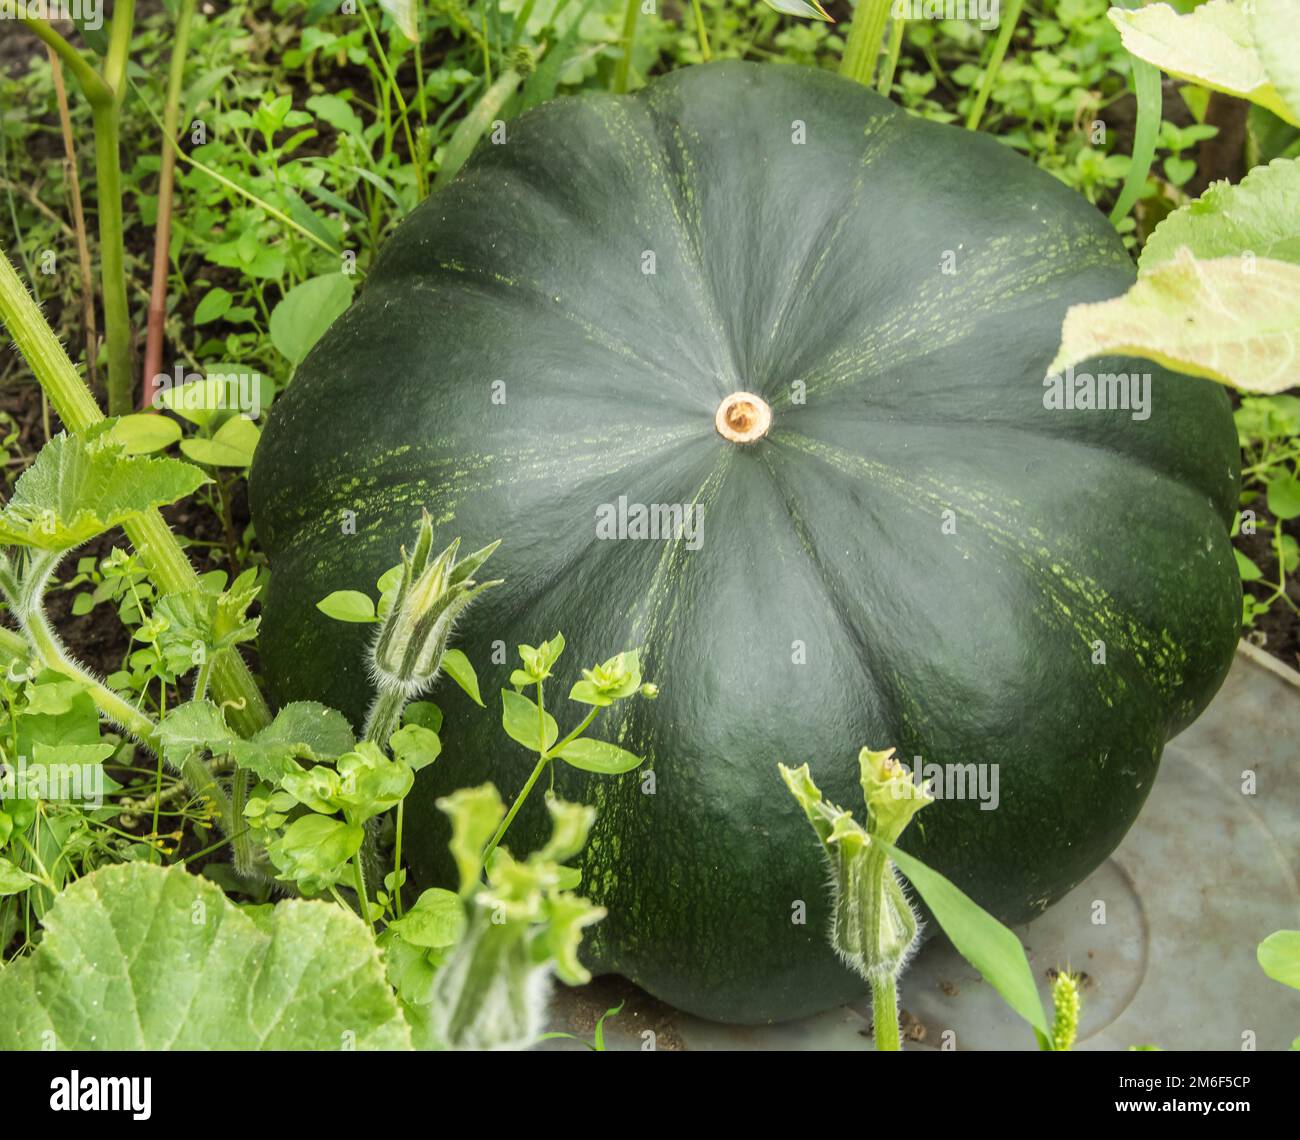 A large green fresh pumpkin on a Garden bed on a Bush in the garden. concept of growing organic vege Stock Photo